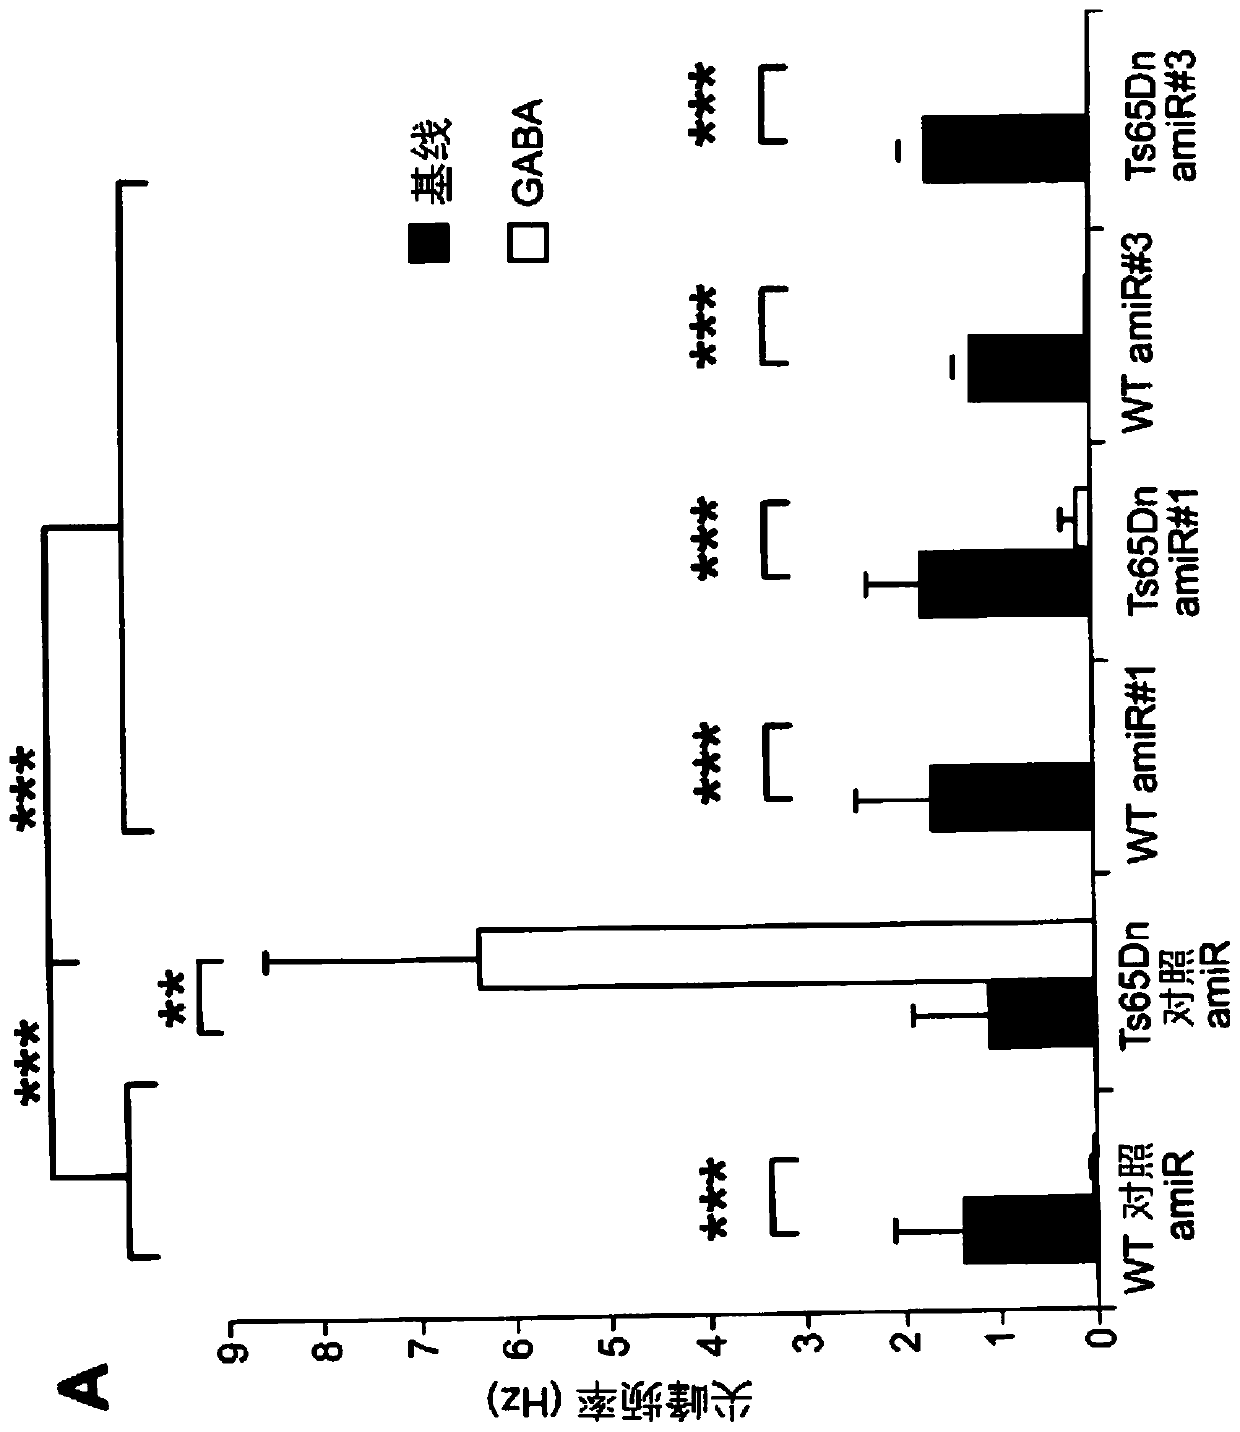 A vector and a pharmaceutical composition for reducing the expression of nkcc1 in a subject in need thereof, as well as a related therapeutic treatment method